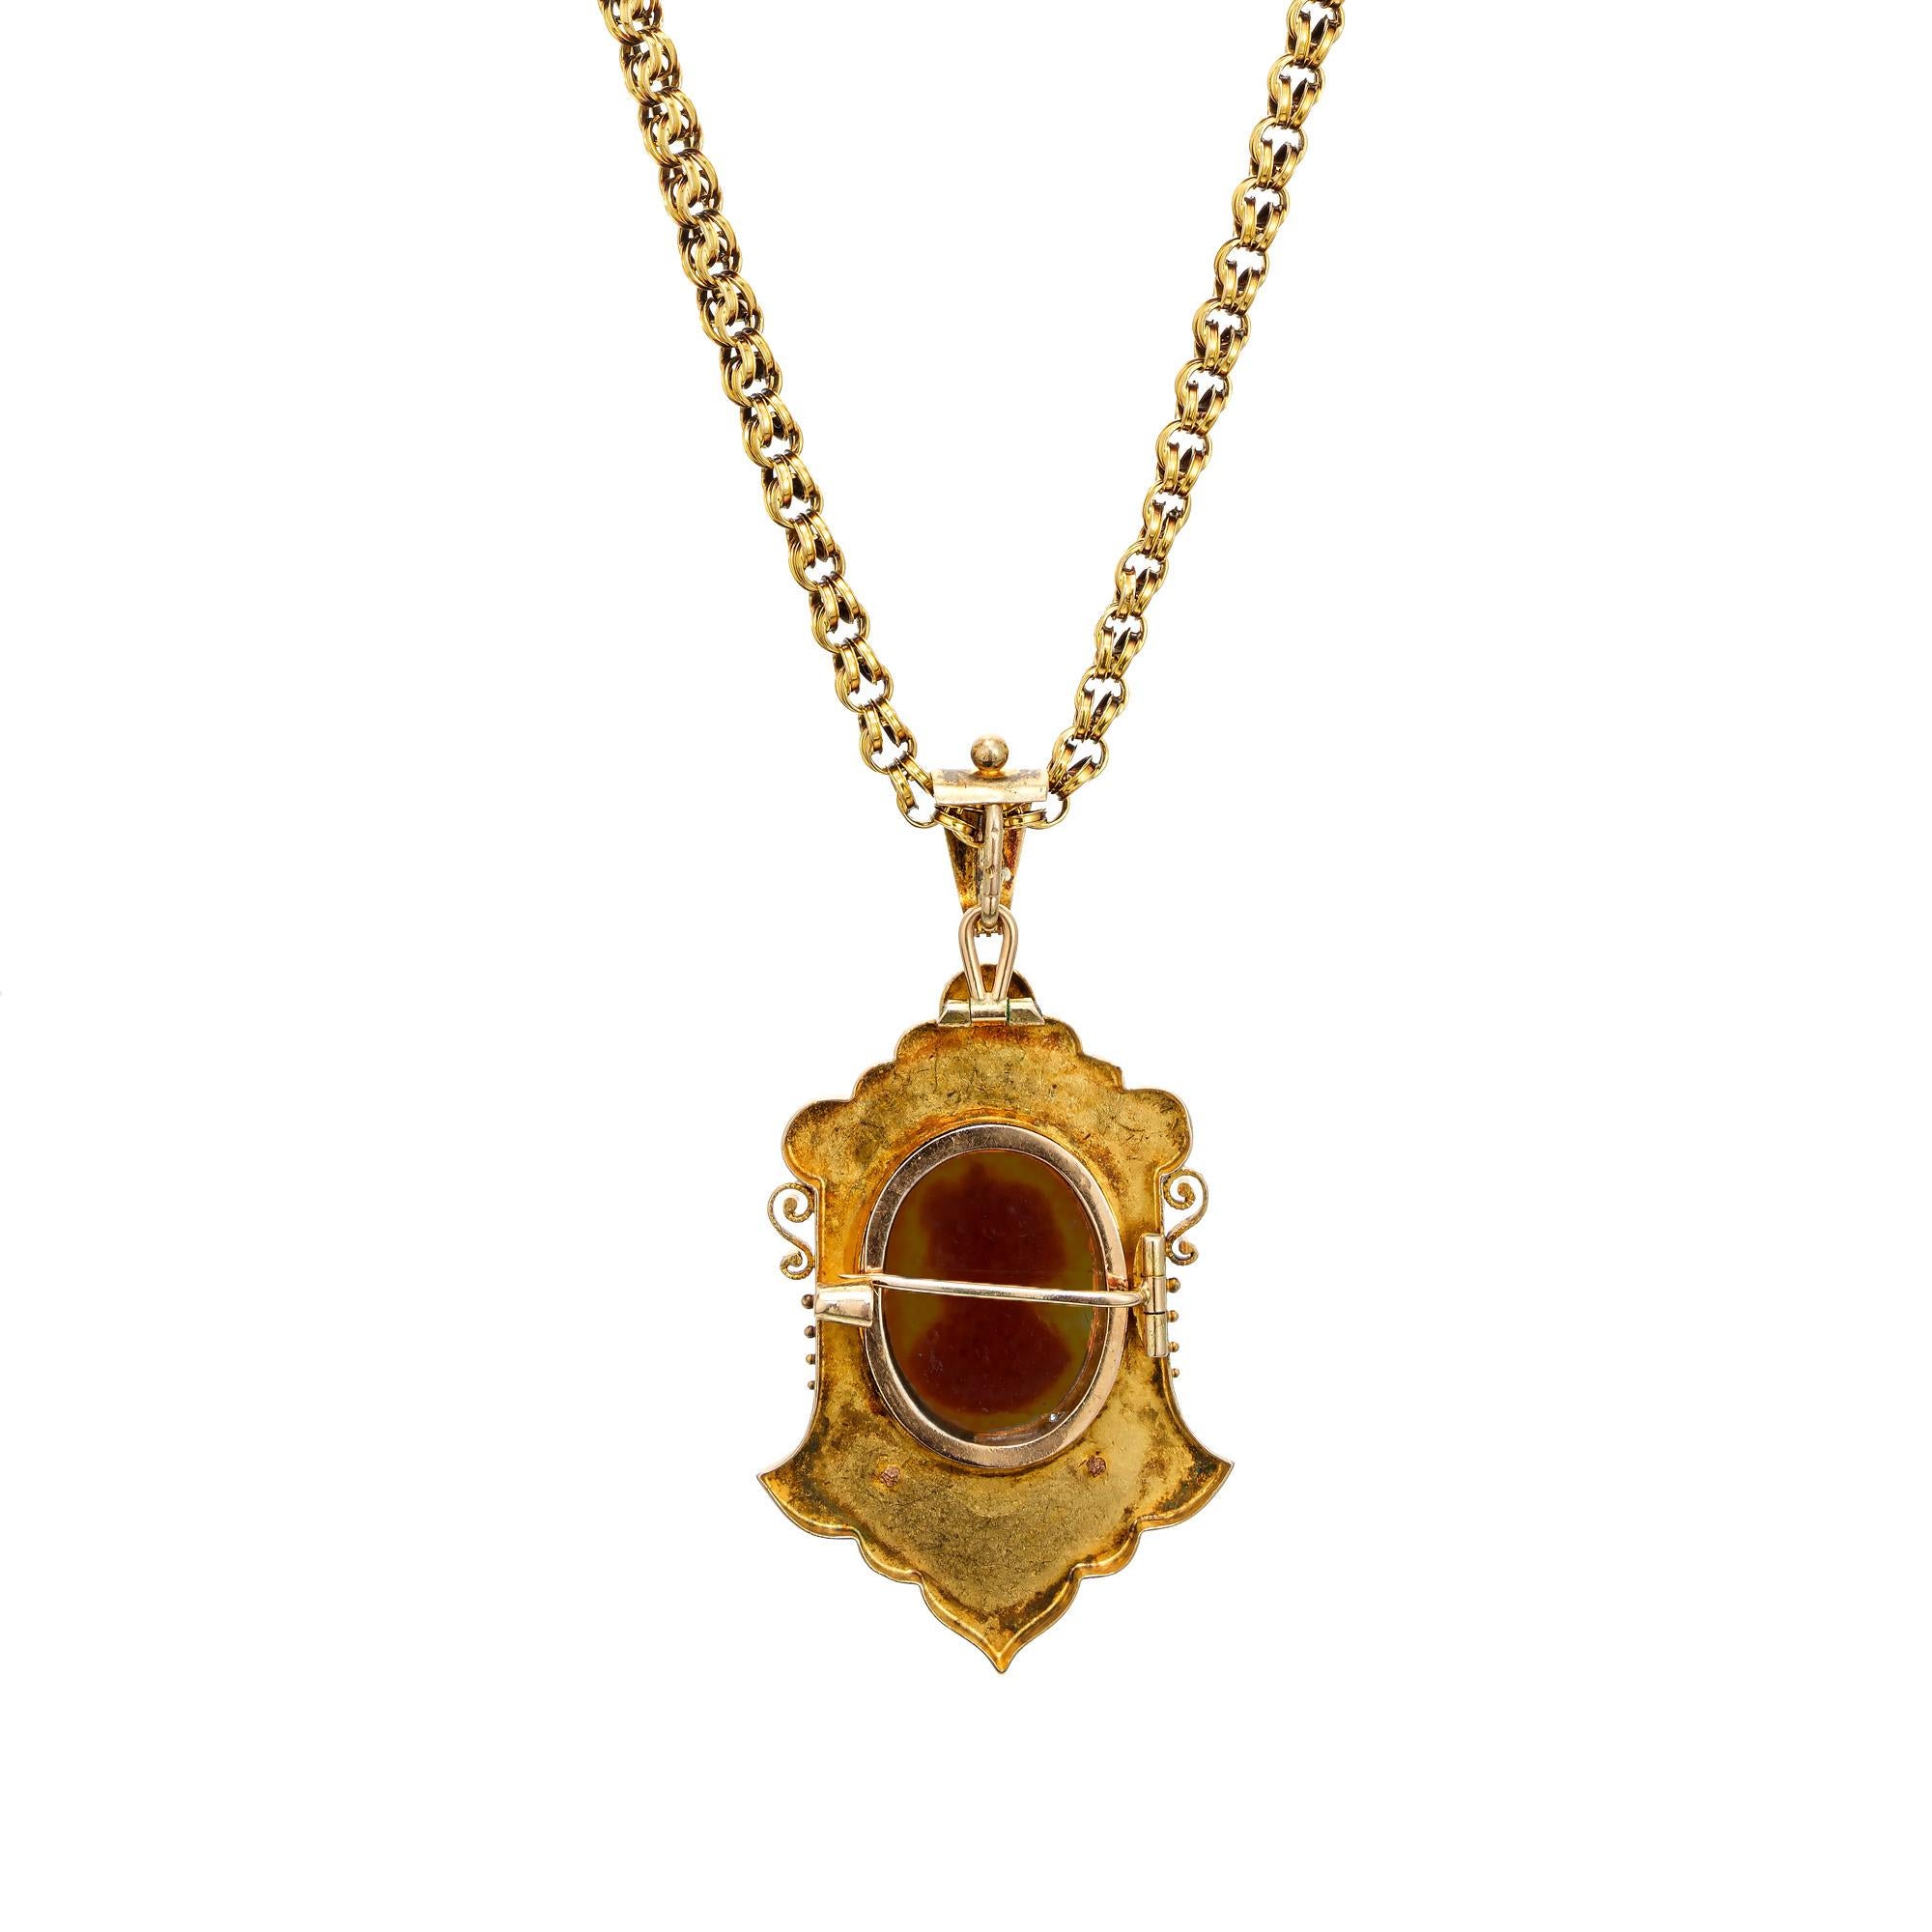 Victorian 1845 Carnelian Hardstone Yellow Gold Cameo Brooch Pendant Necklace In Good Condition For Sale In Stamford, CT